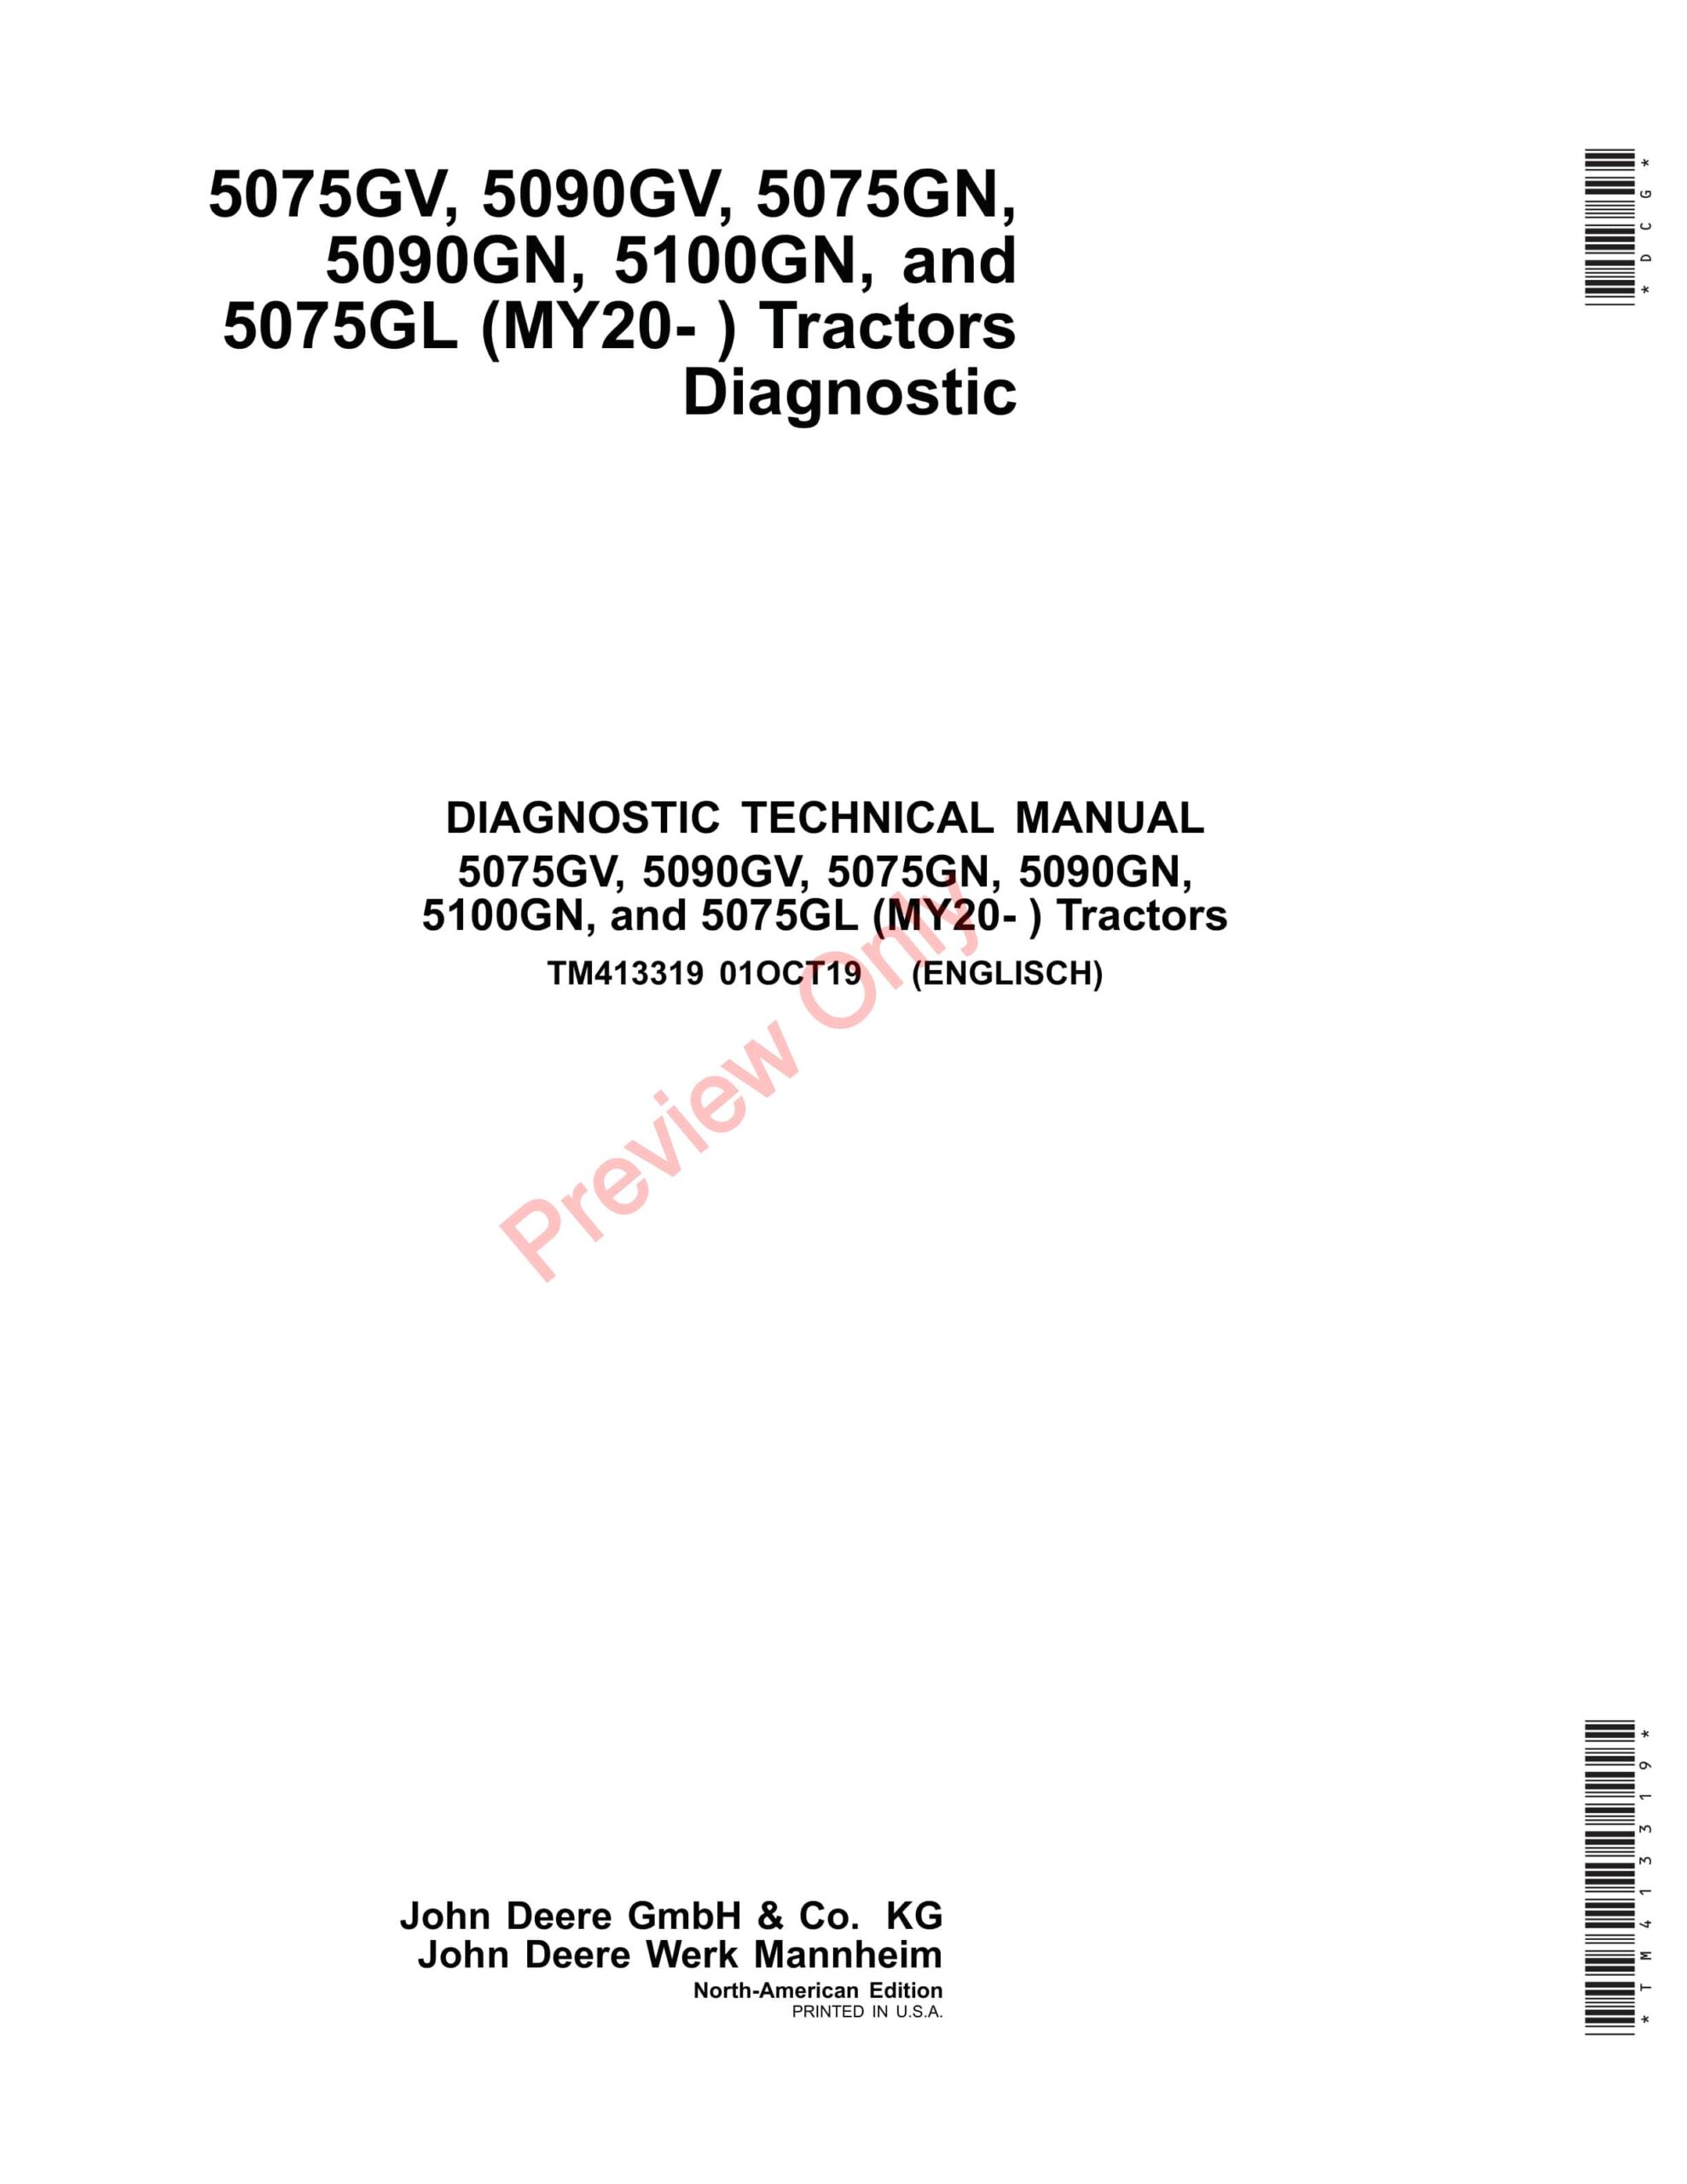 John Deere 5075GL, 5075GN, 5075GV, 5090GN, 5090GV and 5100GN Tractors (Engine F5DF5G) FT4 Diagnostic Technical Manual TM413319 01OCT19-1